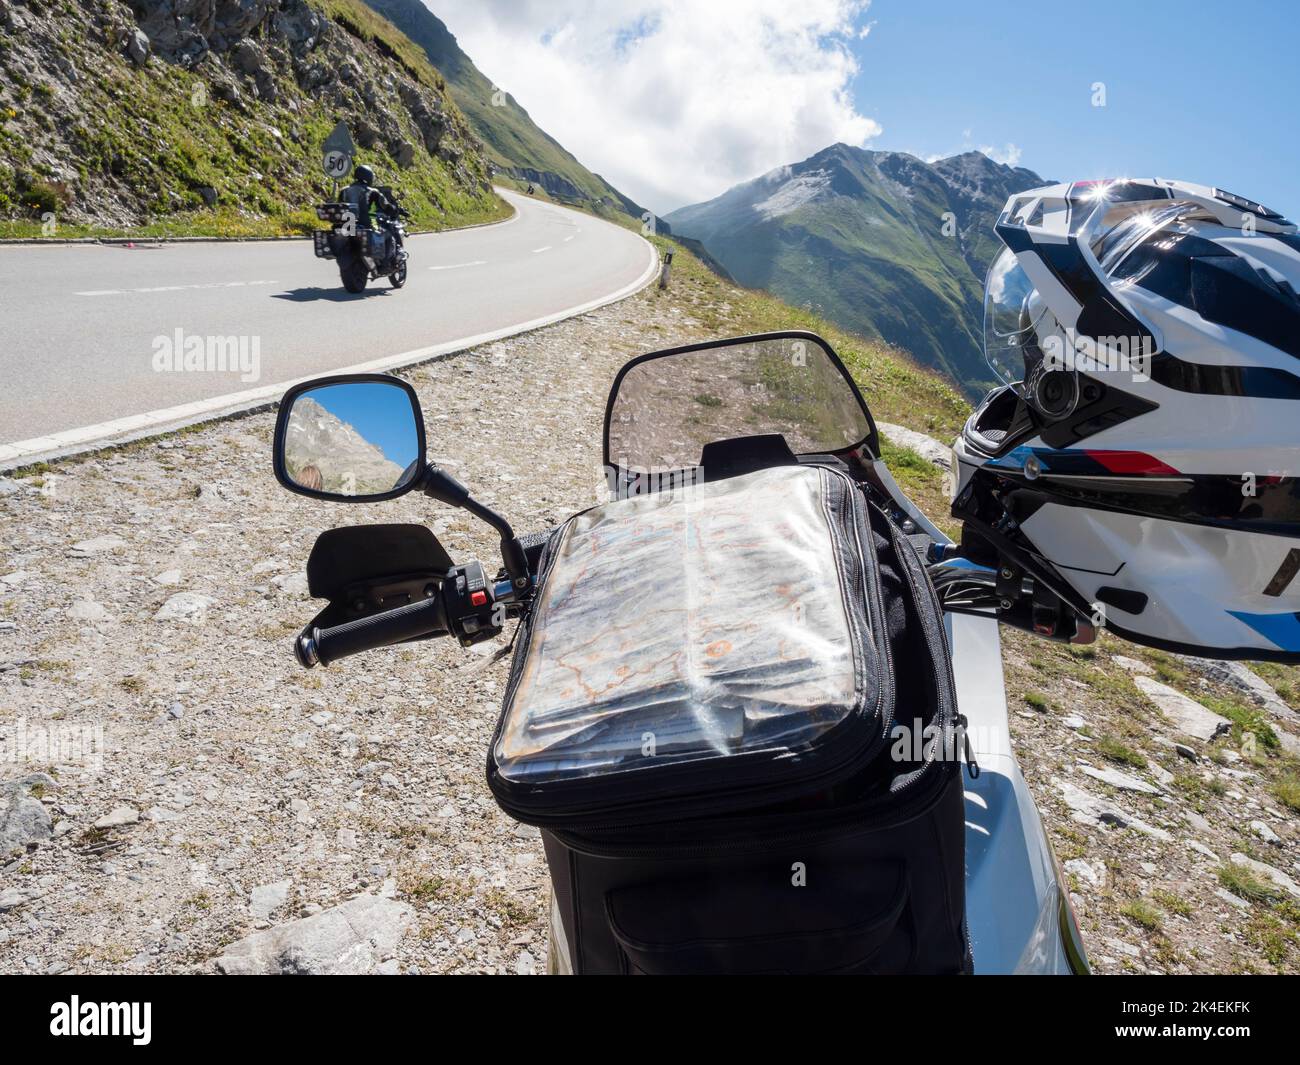 Tank bag with map on an adventure motorcycle at a mountain pass in the Swiss alps. Stock Photo